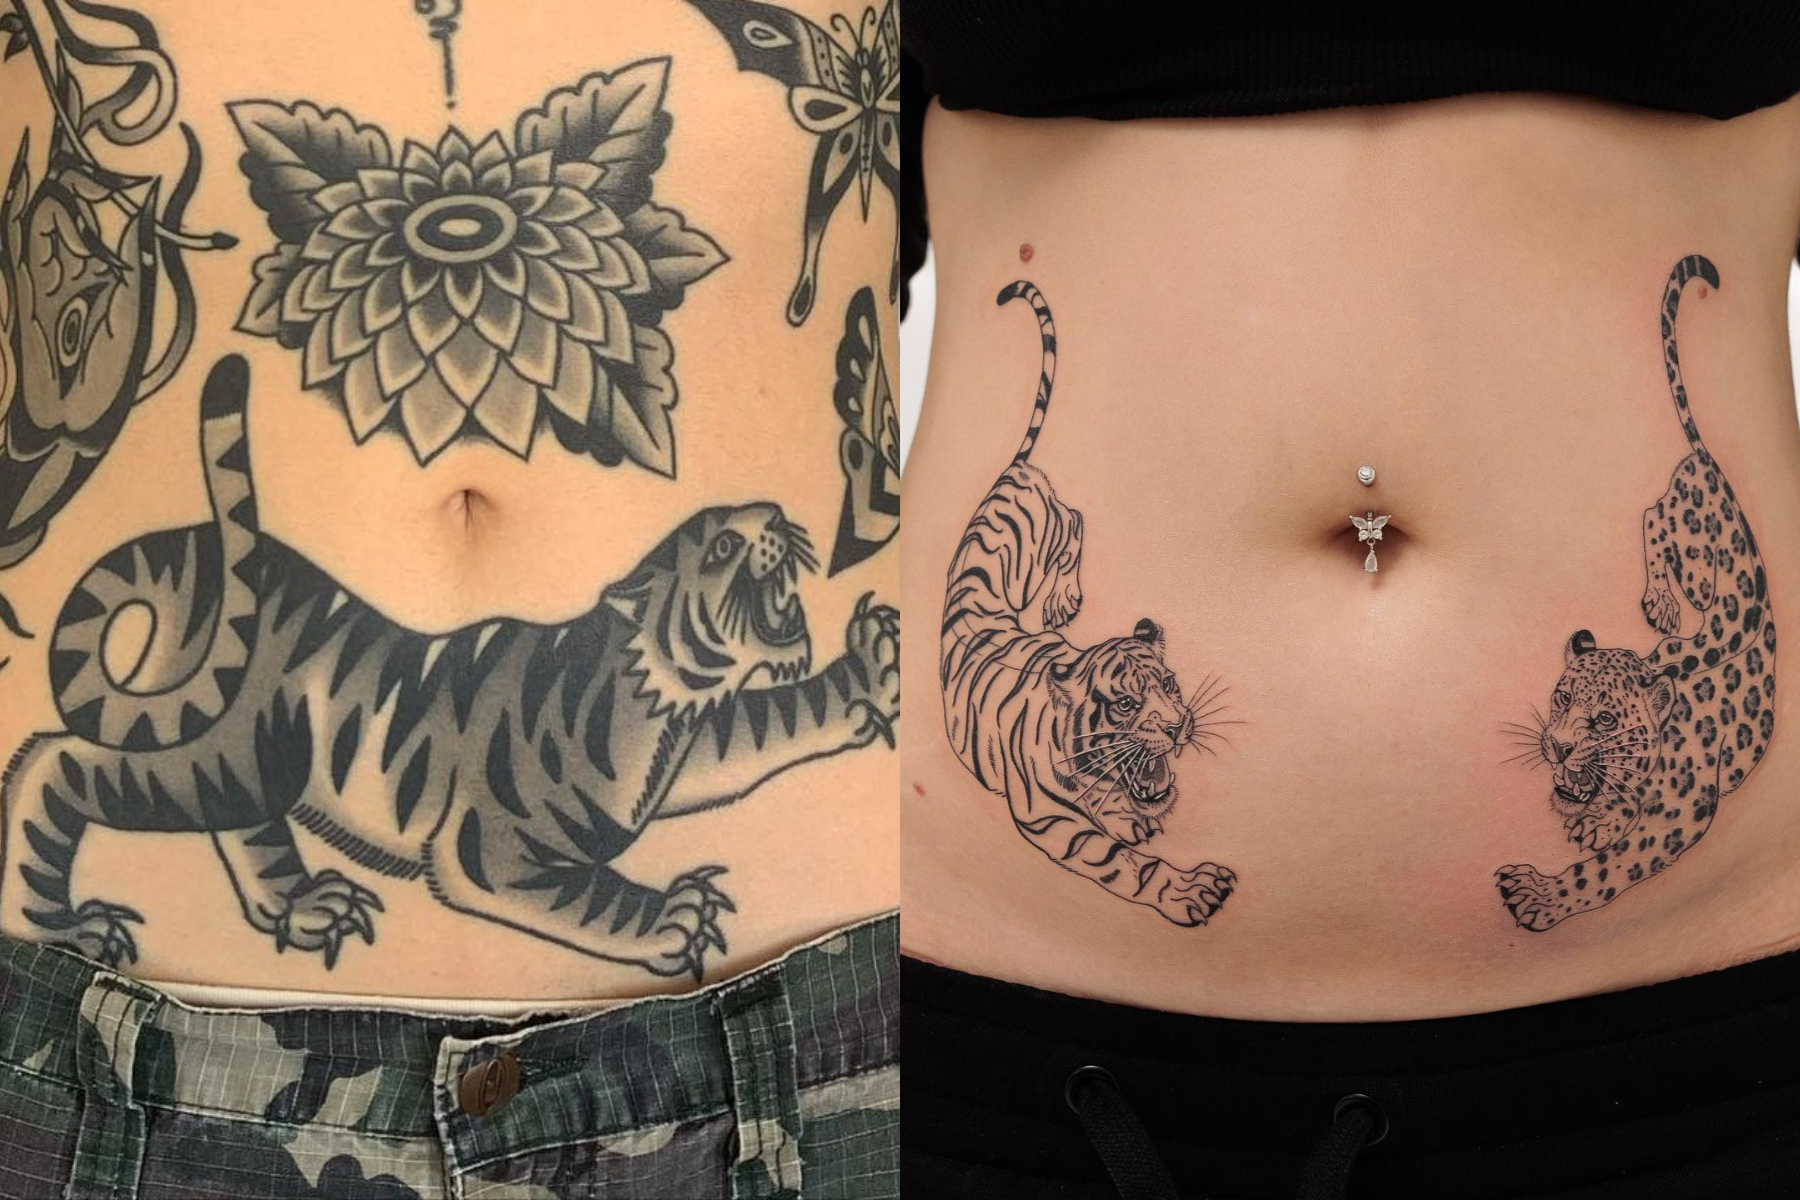 A woman with a black tiger tattoo (L) and another with a tiger and jaguar tattoo (R)